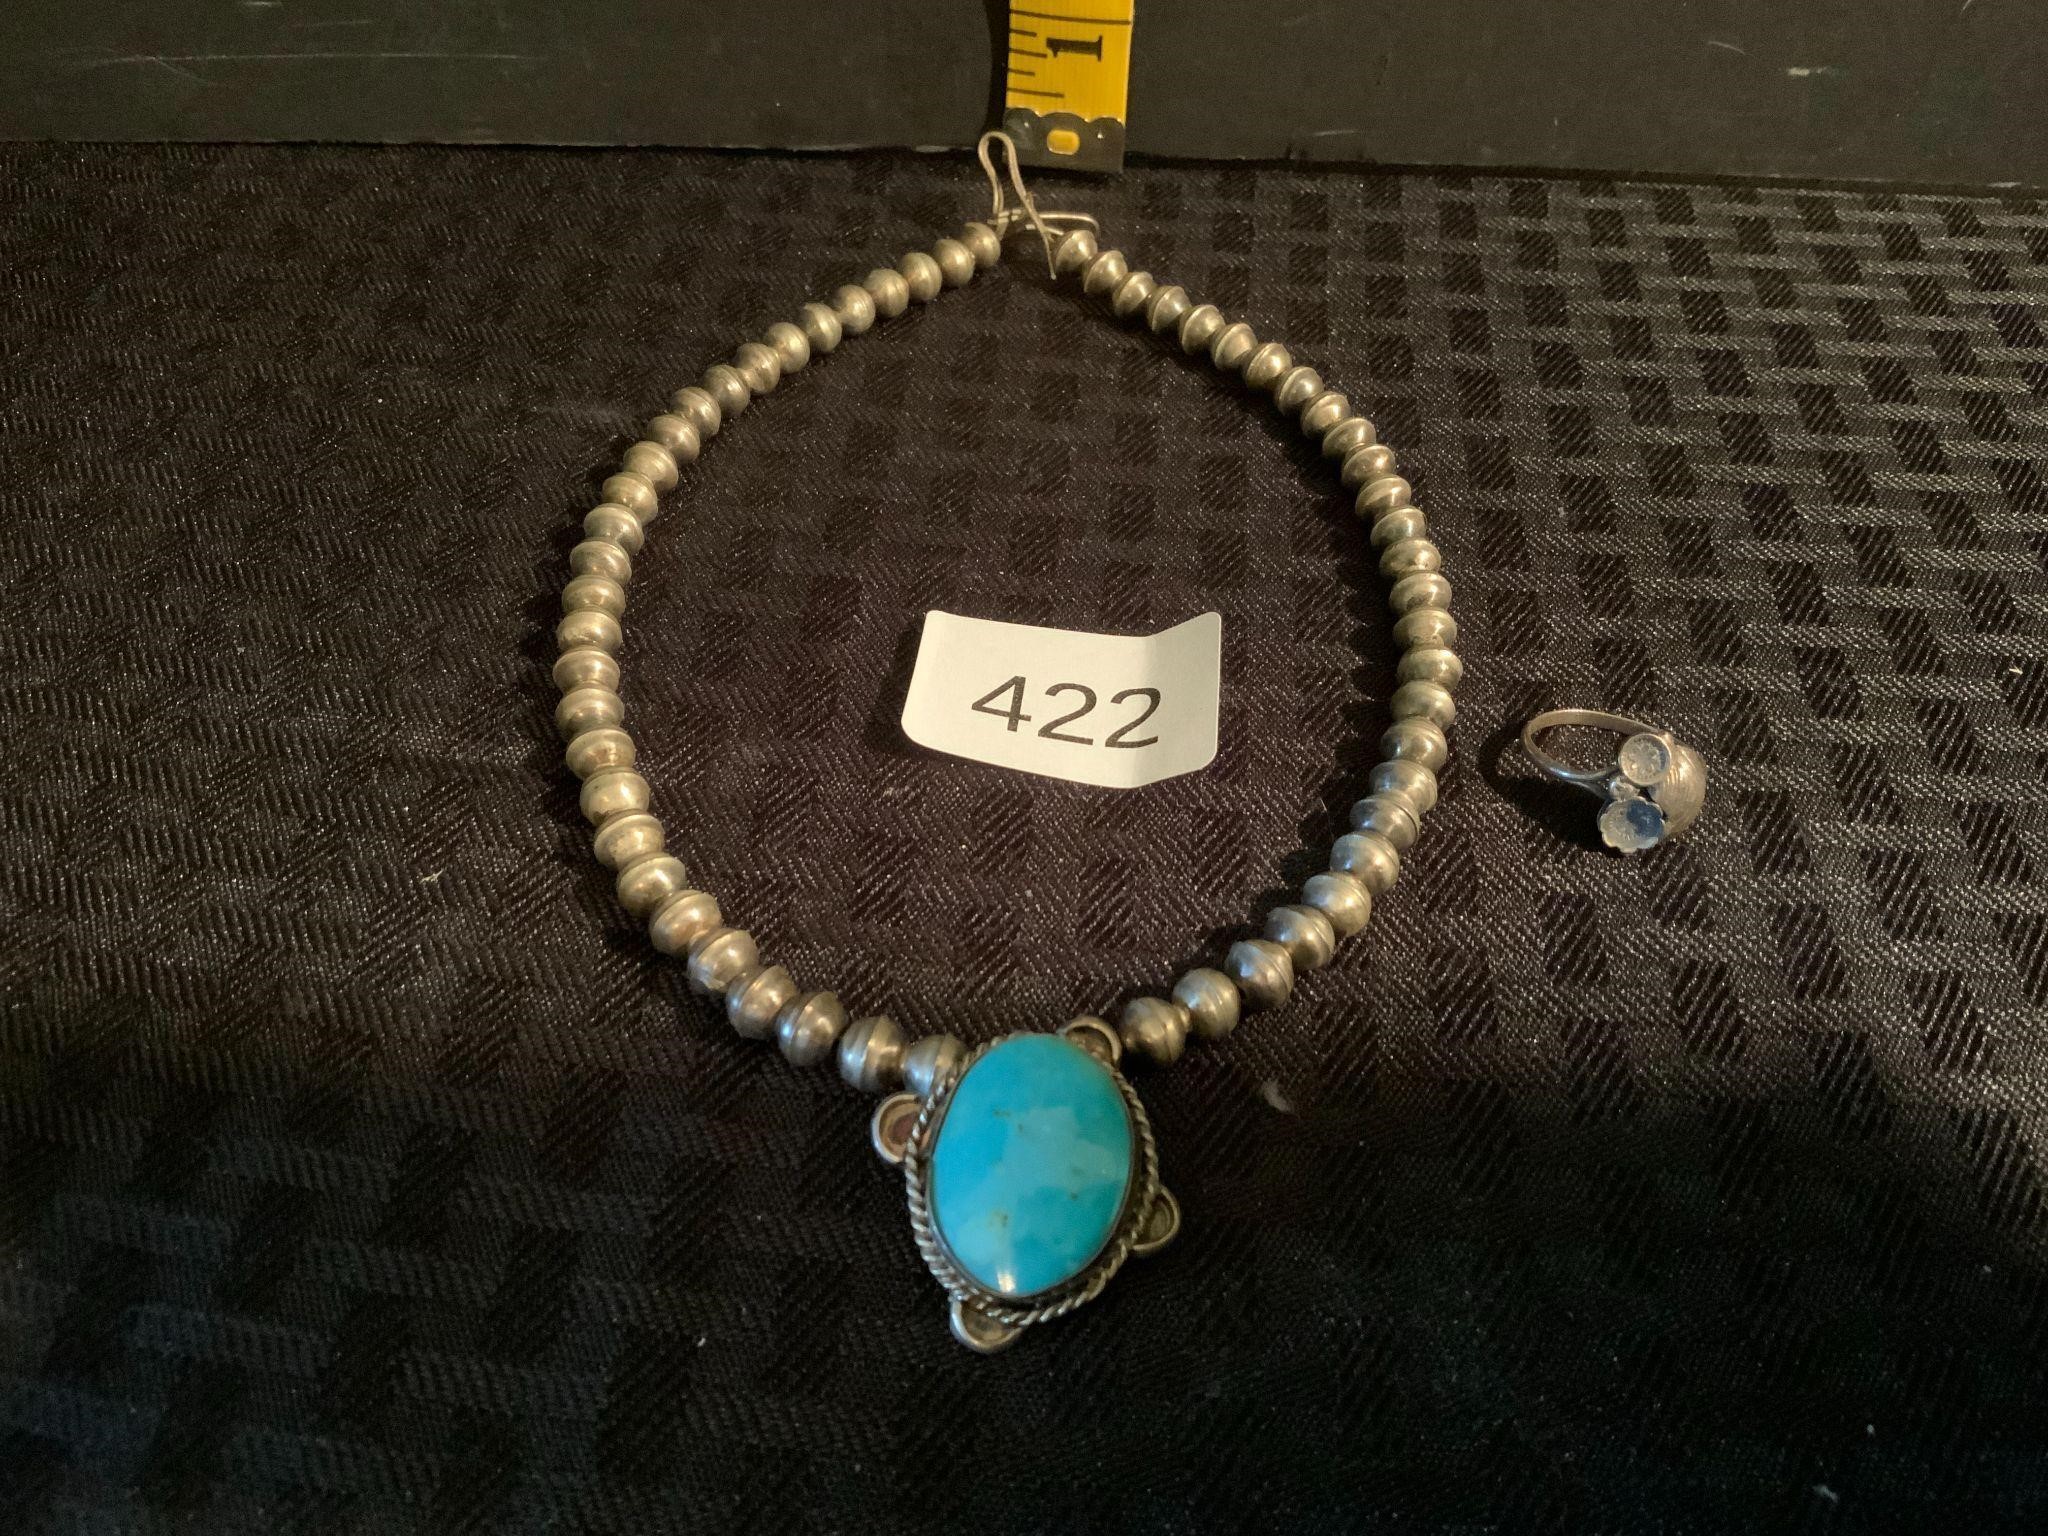 Silver & Turquoise Necklace & Ring Unmarked